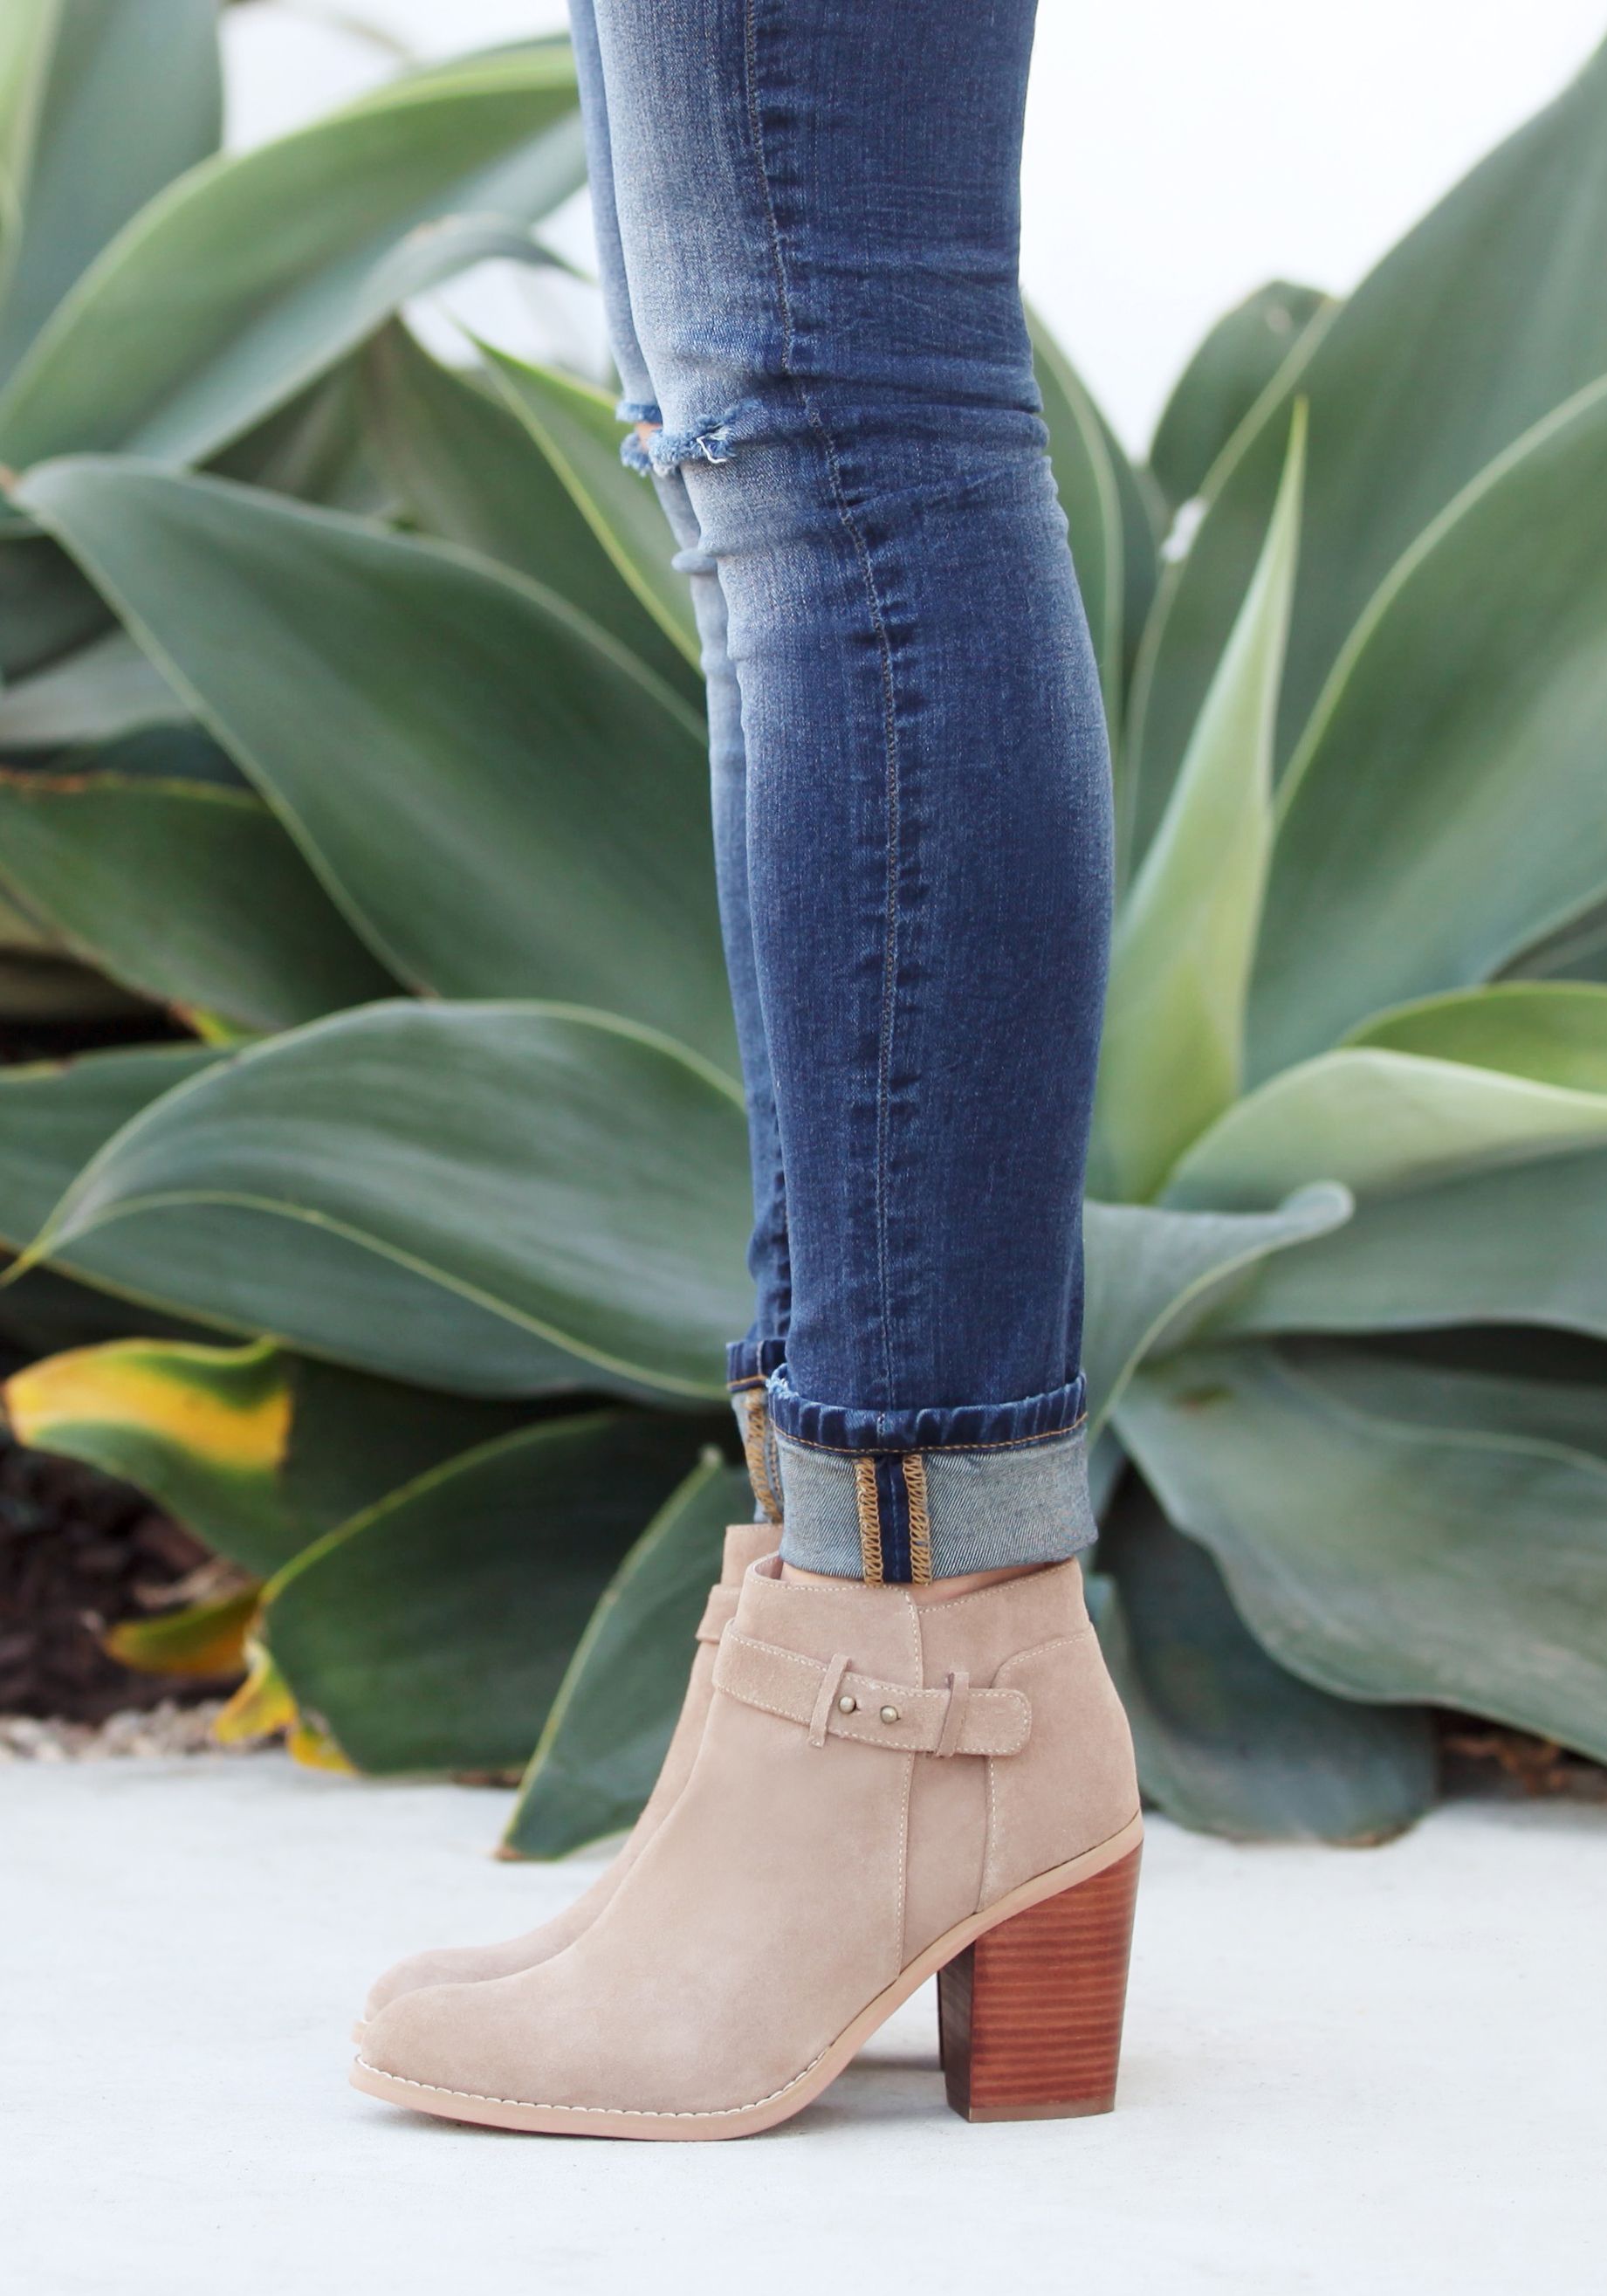 Taupe suede block heel bootie with buckle detailing at the ankle | Sole Society Ly